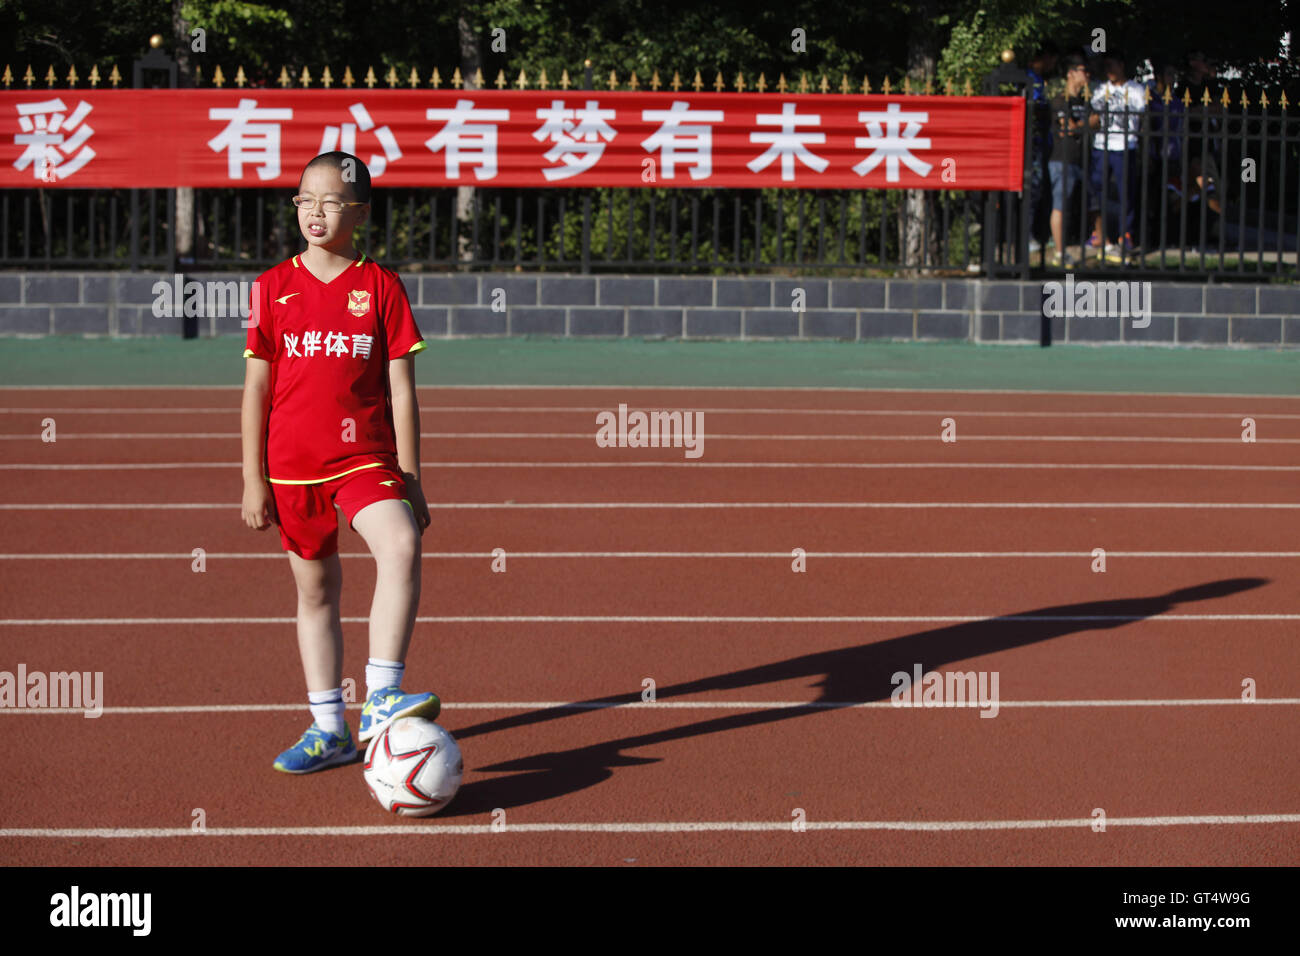 Heihe, Heihe, China. 9th Sep, 2016. Heihe, CHINA-?August 27 2016:?(EDITORIAL?USE?ONLY.?CHINA?OUT) A ball boy at the Sino-Russian football match. A Sino-Russian football match is held in Heihe, northeast ChinaÂ¡Â¯s Heilongjang Province. Dozens of Chinese ball boys take the responsibility of picking up football during the match. © SIPA Asia/ZUMA Wire/Alamy Live News Stock Photo